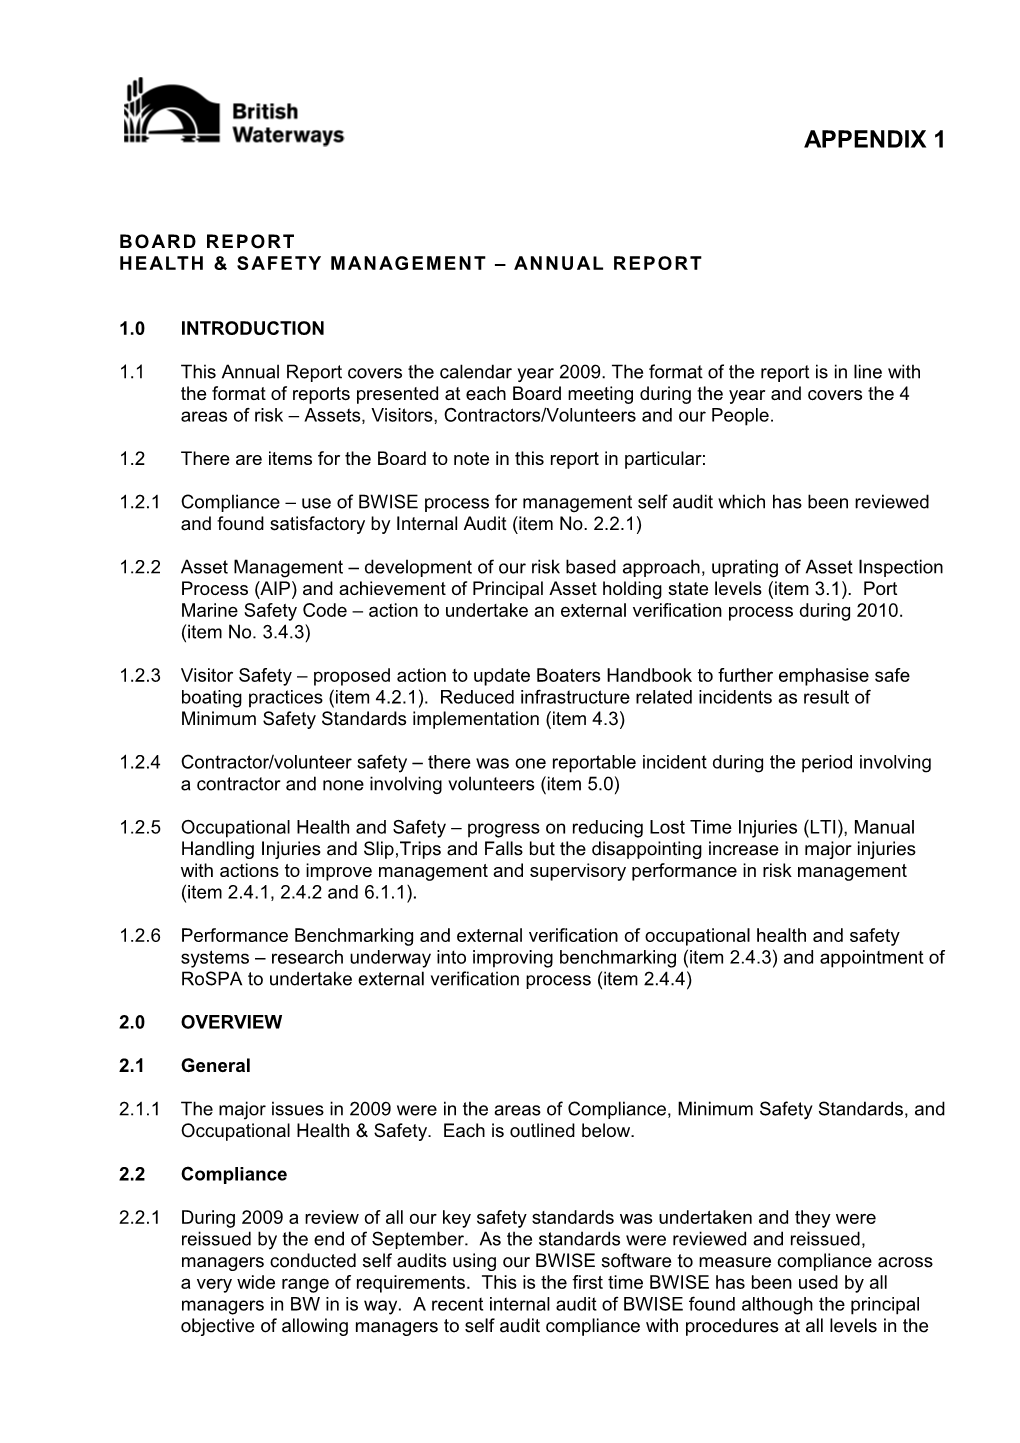 HEALTH & SAFETY MANAGEMENT Annual Report